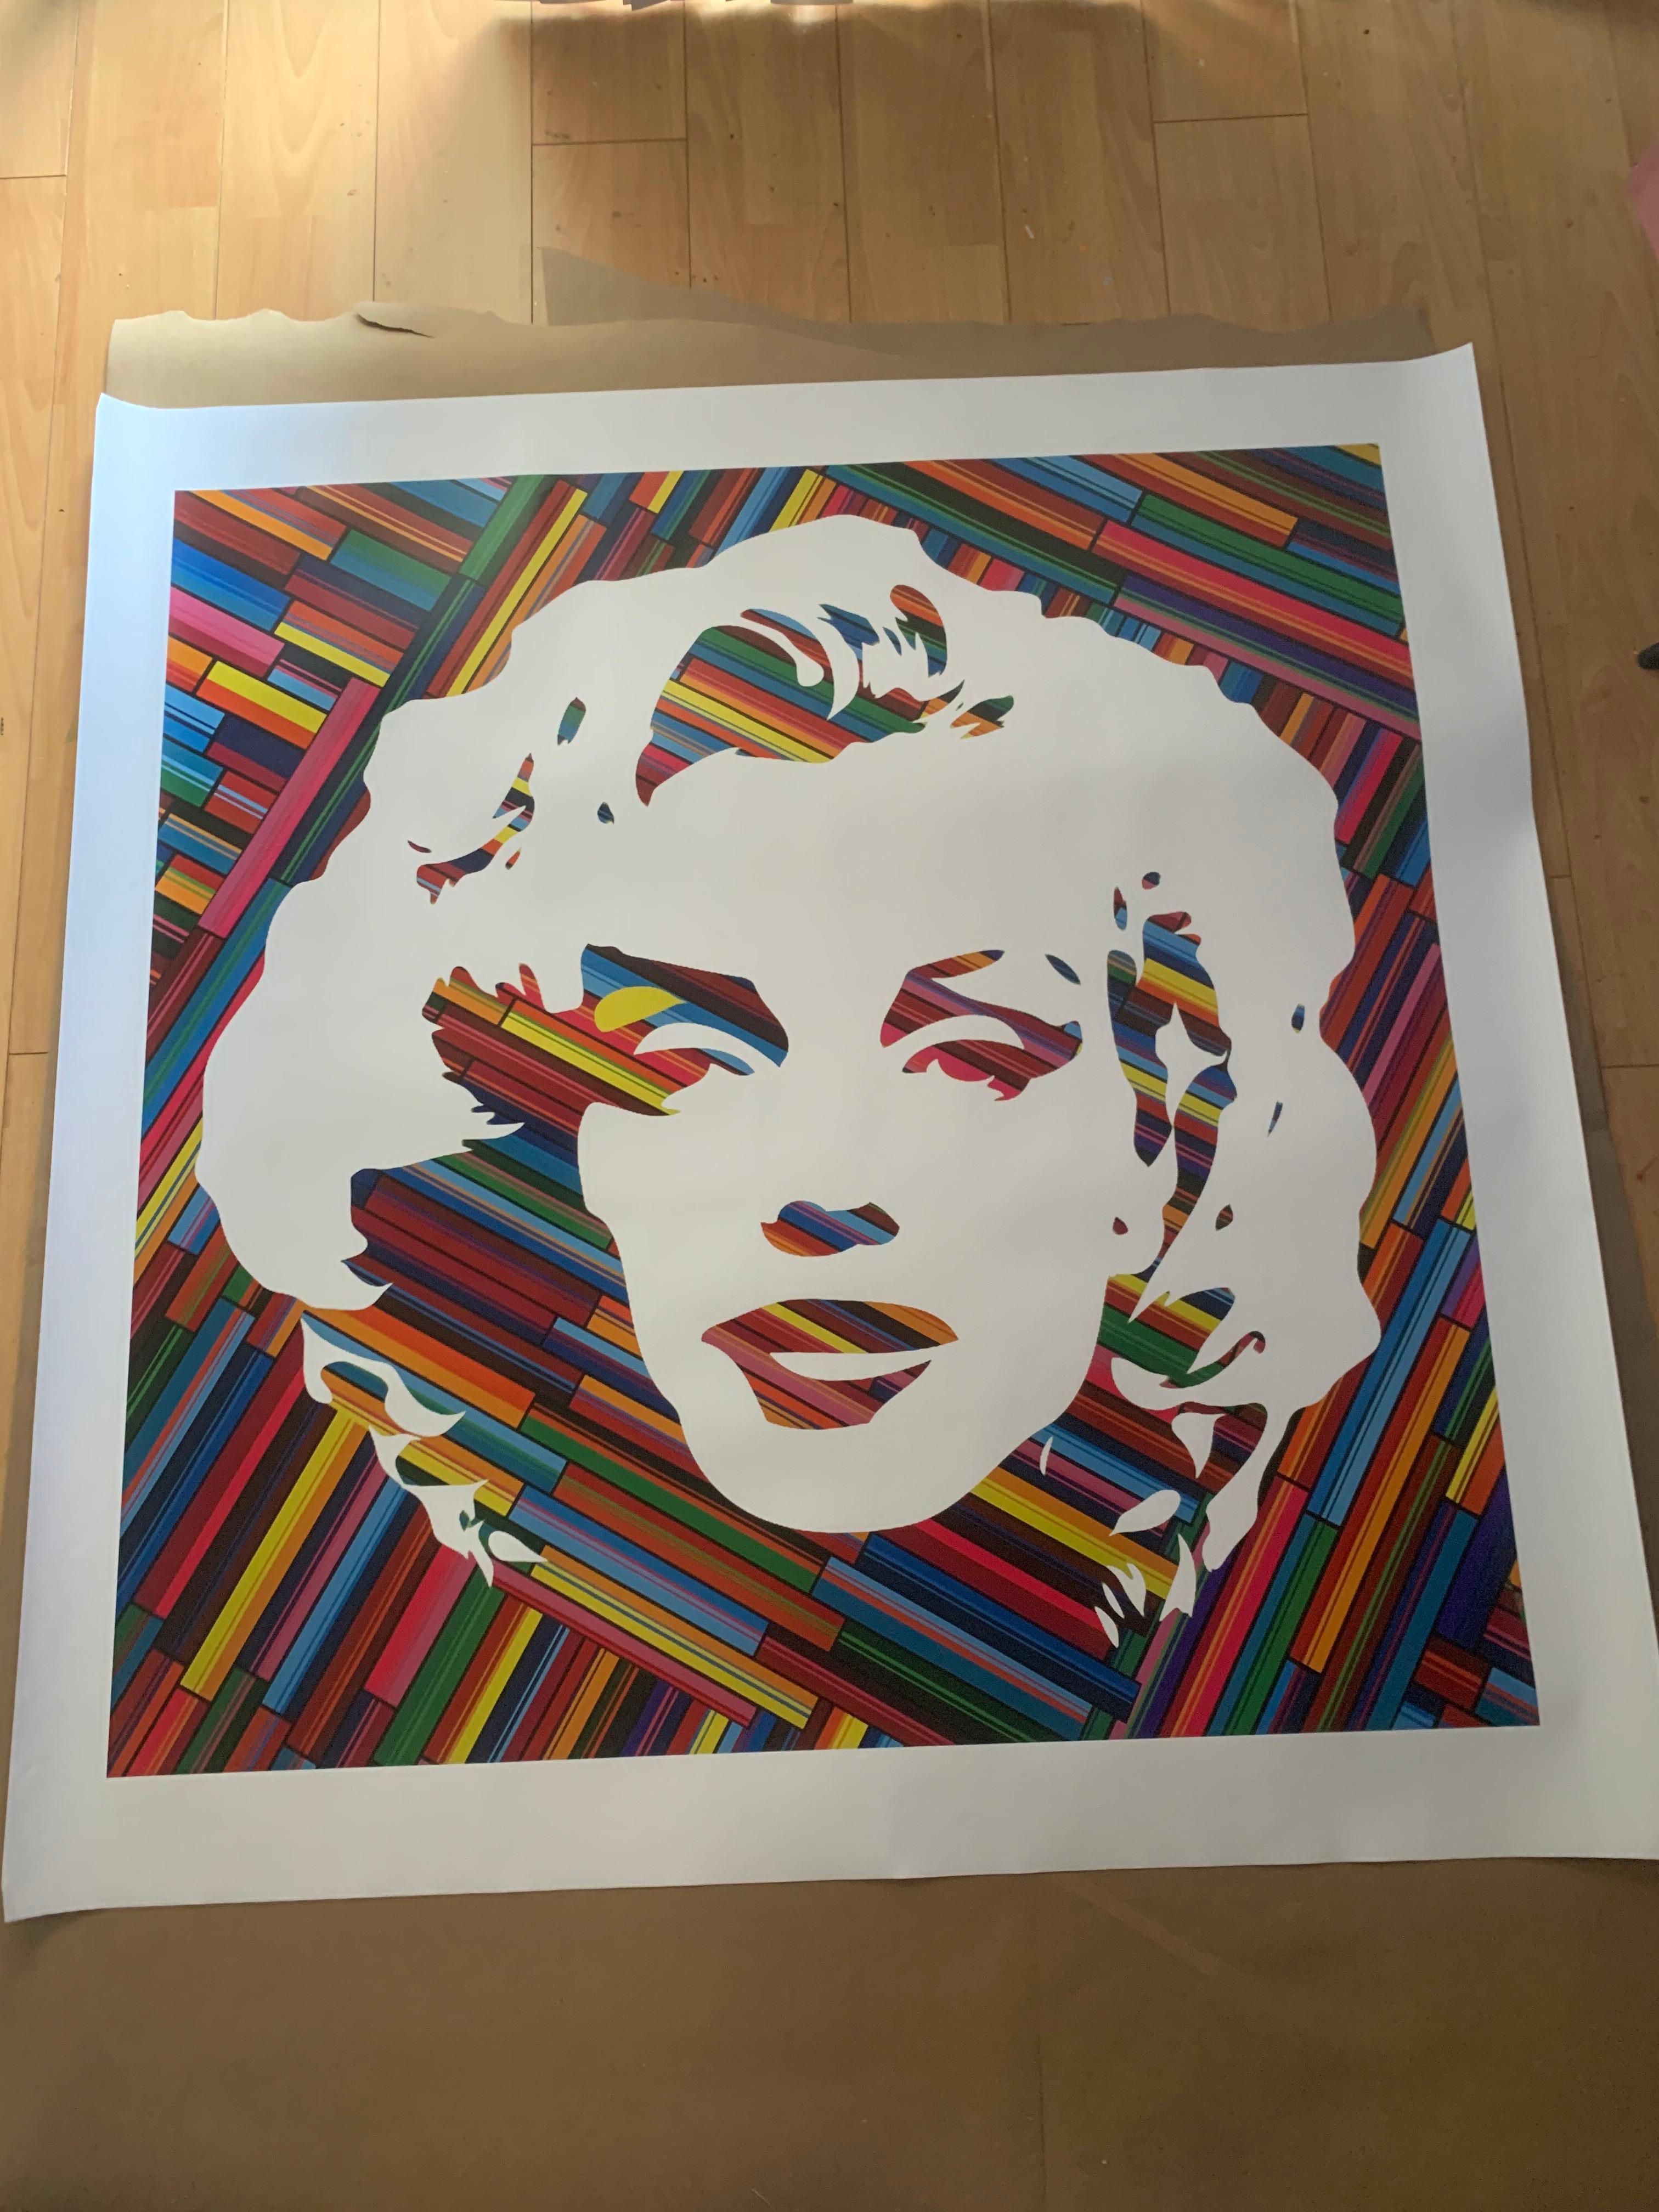               **ANNUAL SUPER SALE UNTIL APRIL 15TH ONLY**
*This Price Won't Be Repeated Again This Year-Take Advantage Of It*

Celebrating the one and only Marilyn Monroe by this original series by Mauro Oliveira. 

Limited edition of 30 museum